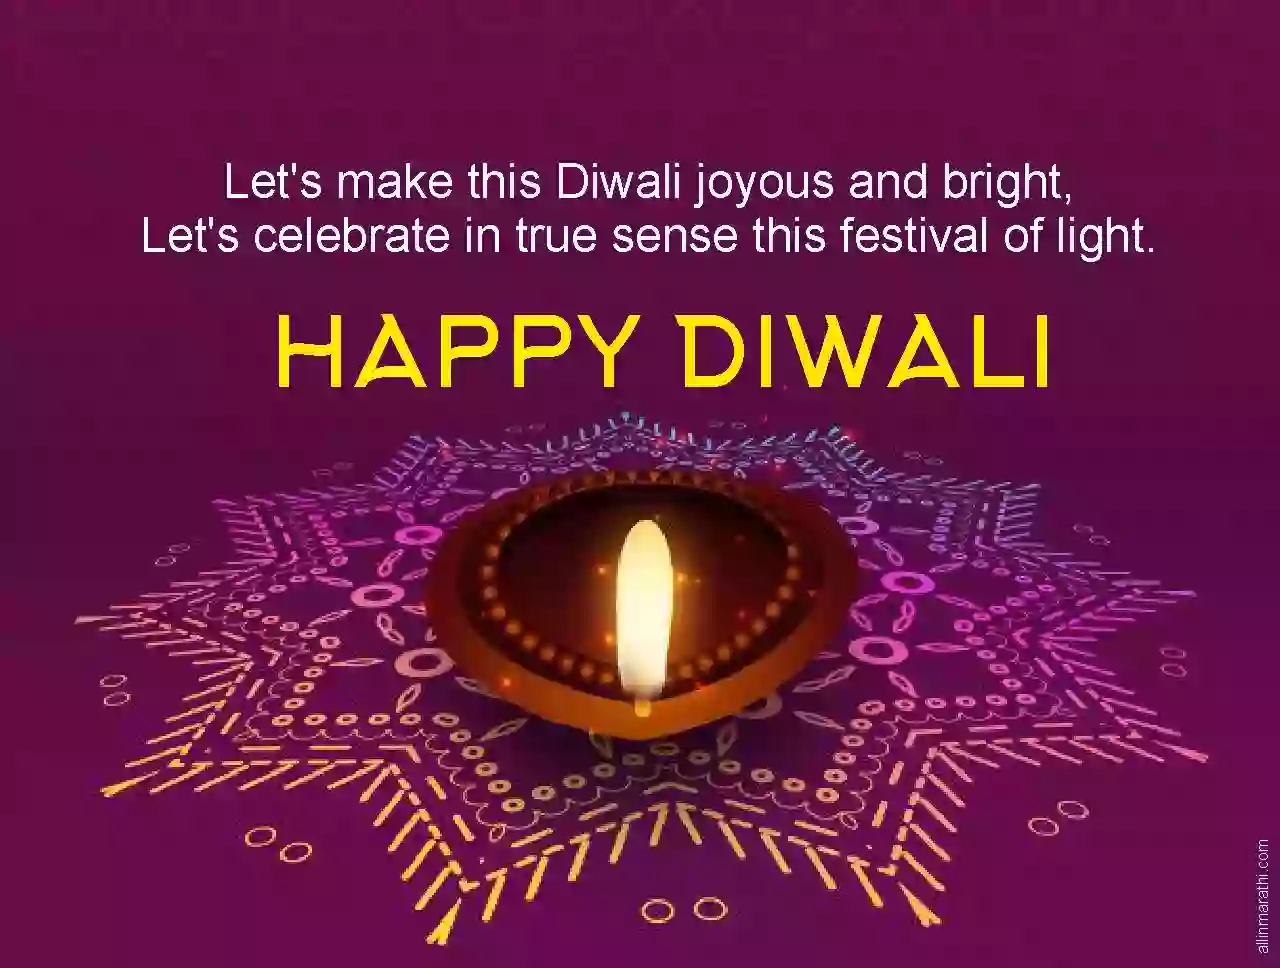 Happy Diwali images in English